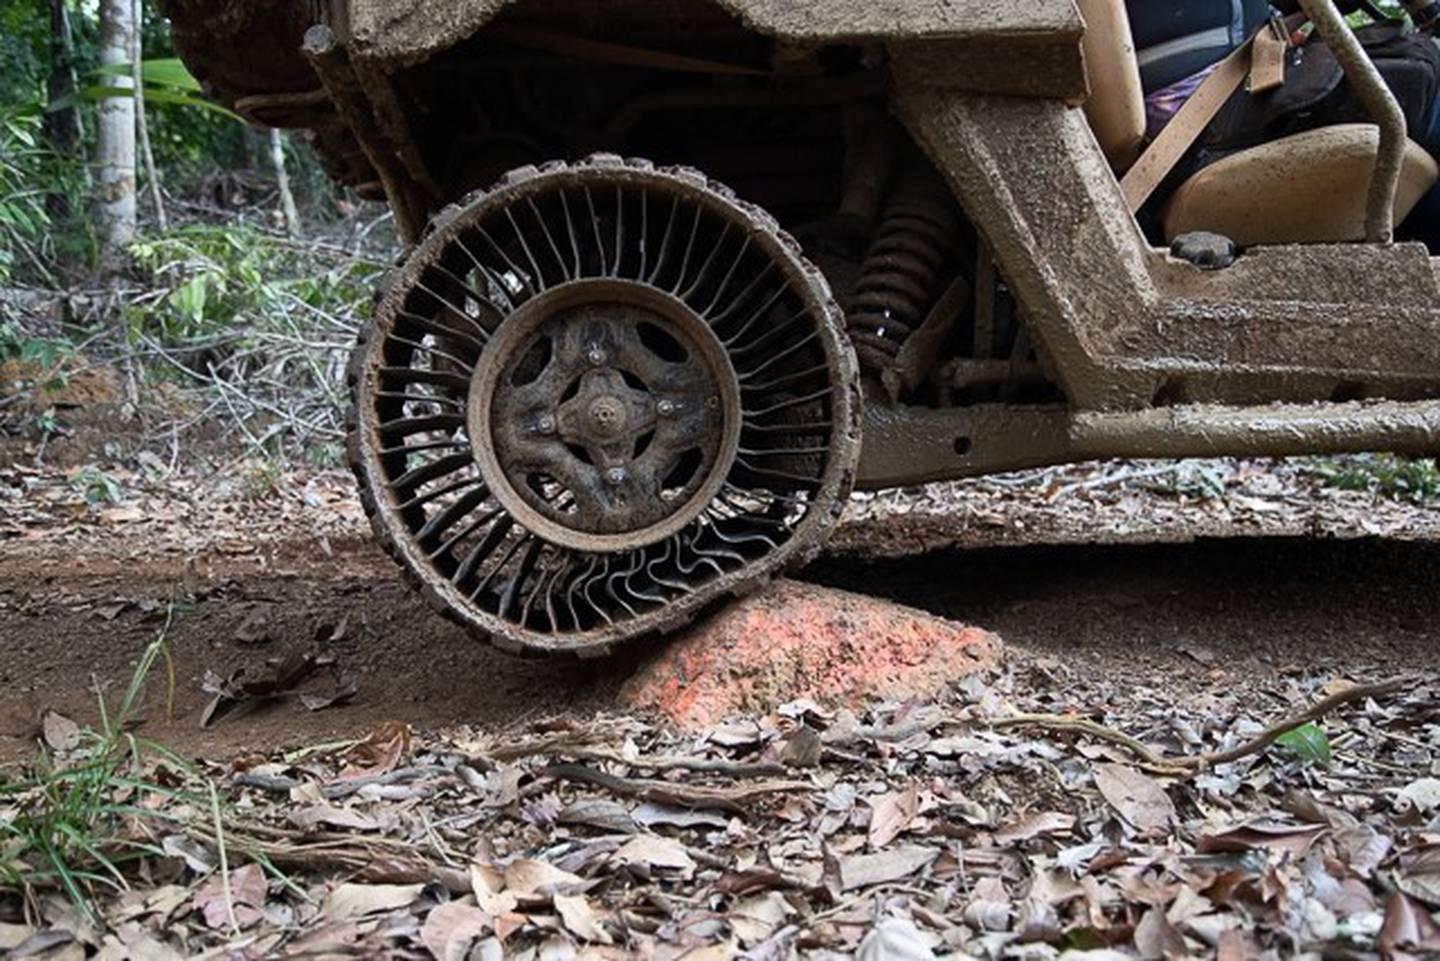 One recent Army Tropic Regions Test Center involved the Polaris MRZR, a military version of the popular off-road vehicle that that was outfitted with Tweels instead of standard tires. The Tweel, produced by Michelin, is an Soldiers might never have another flat tire with these â€˜Tweelsâ€™